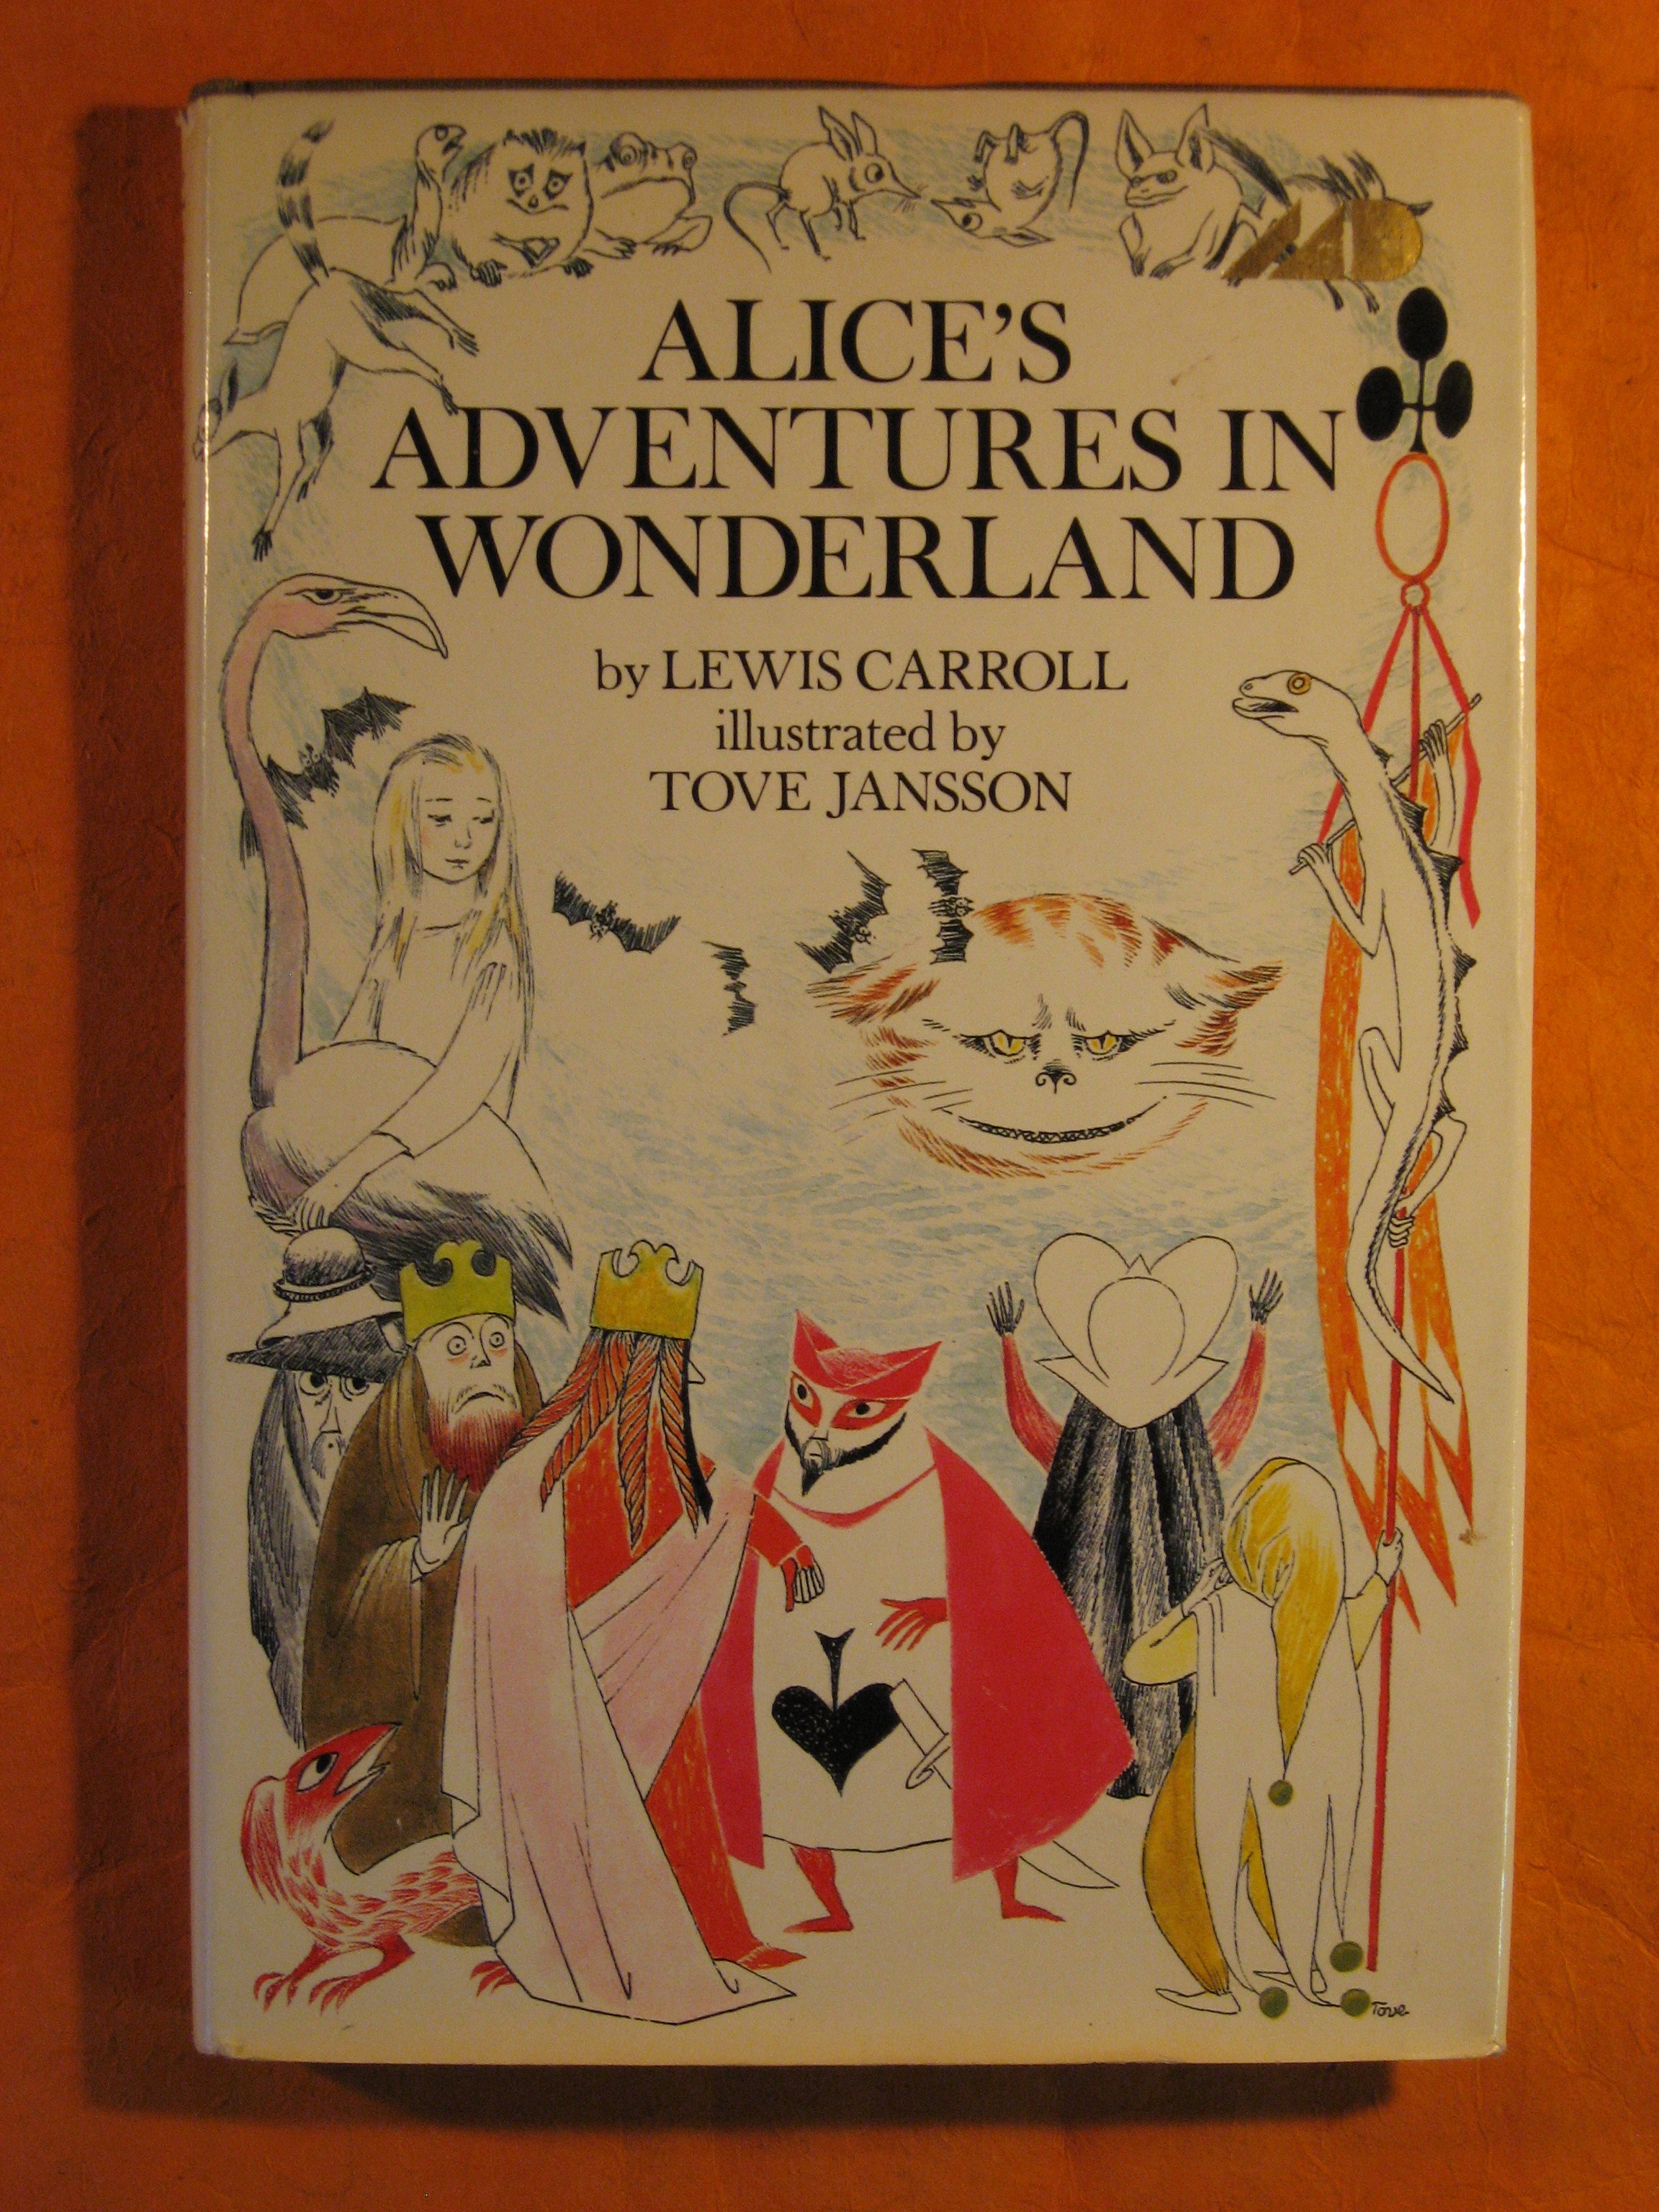 Alice's Adventures in Wonderland illustrated by Tove Jansson